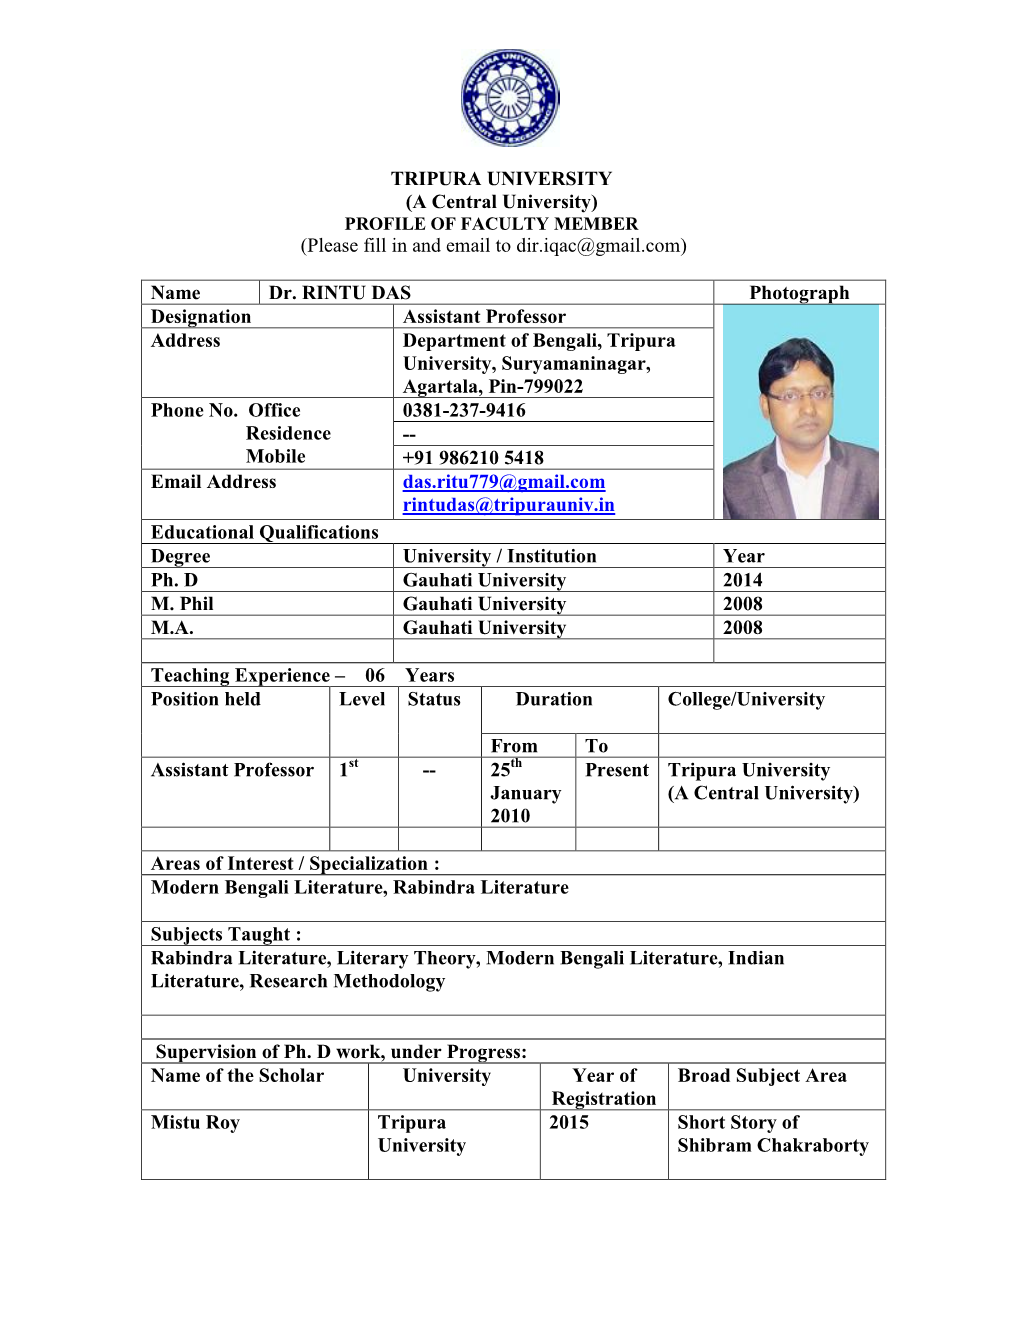 TRIPURA UNIVERSITY (A Central University) (Please Fill in and Email